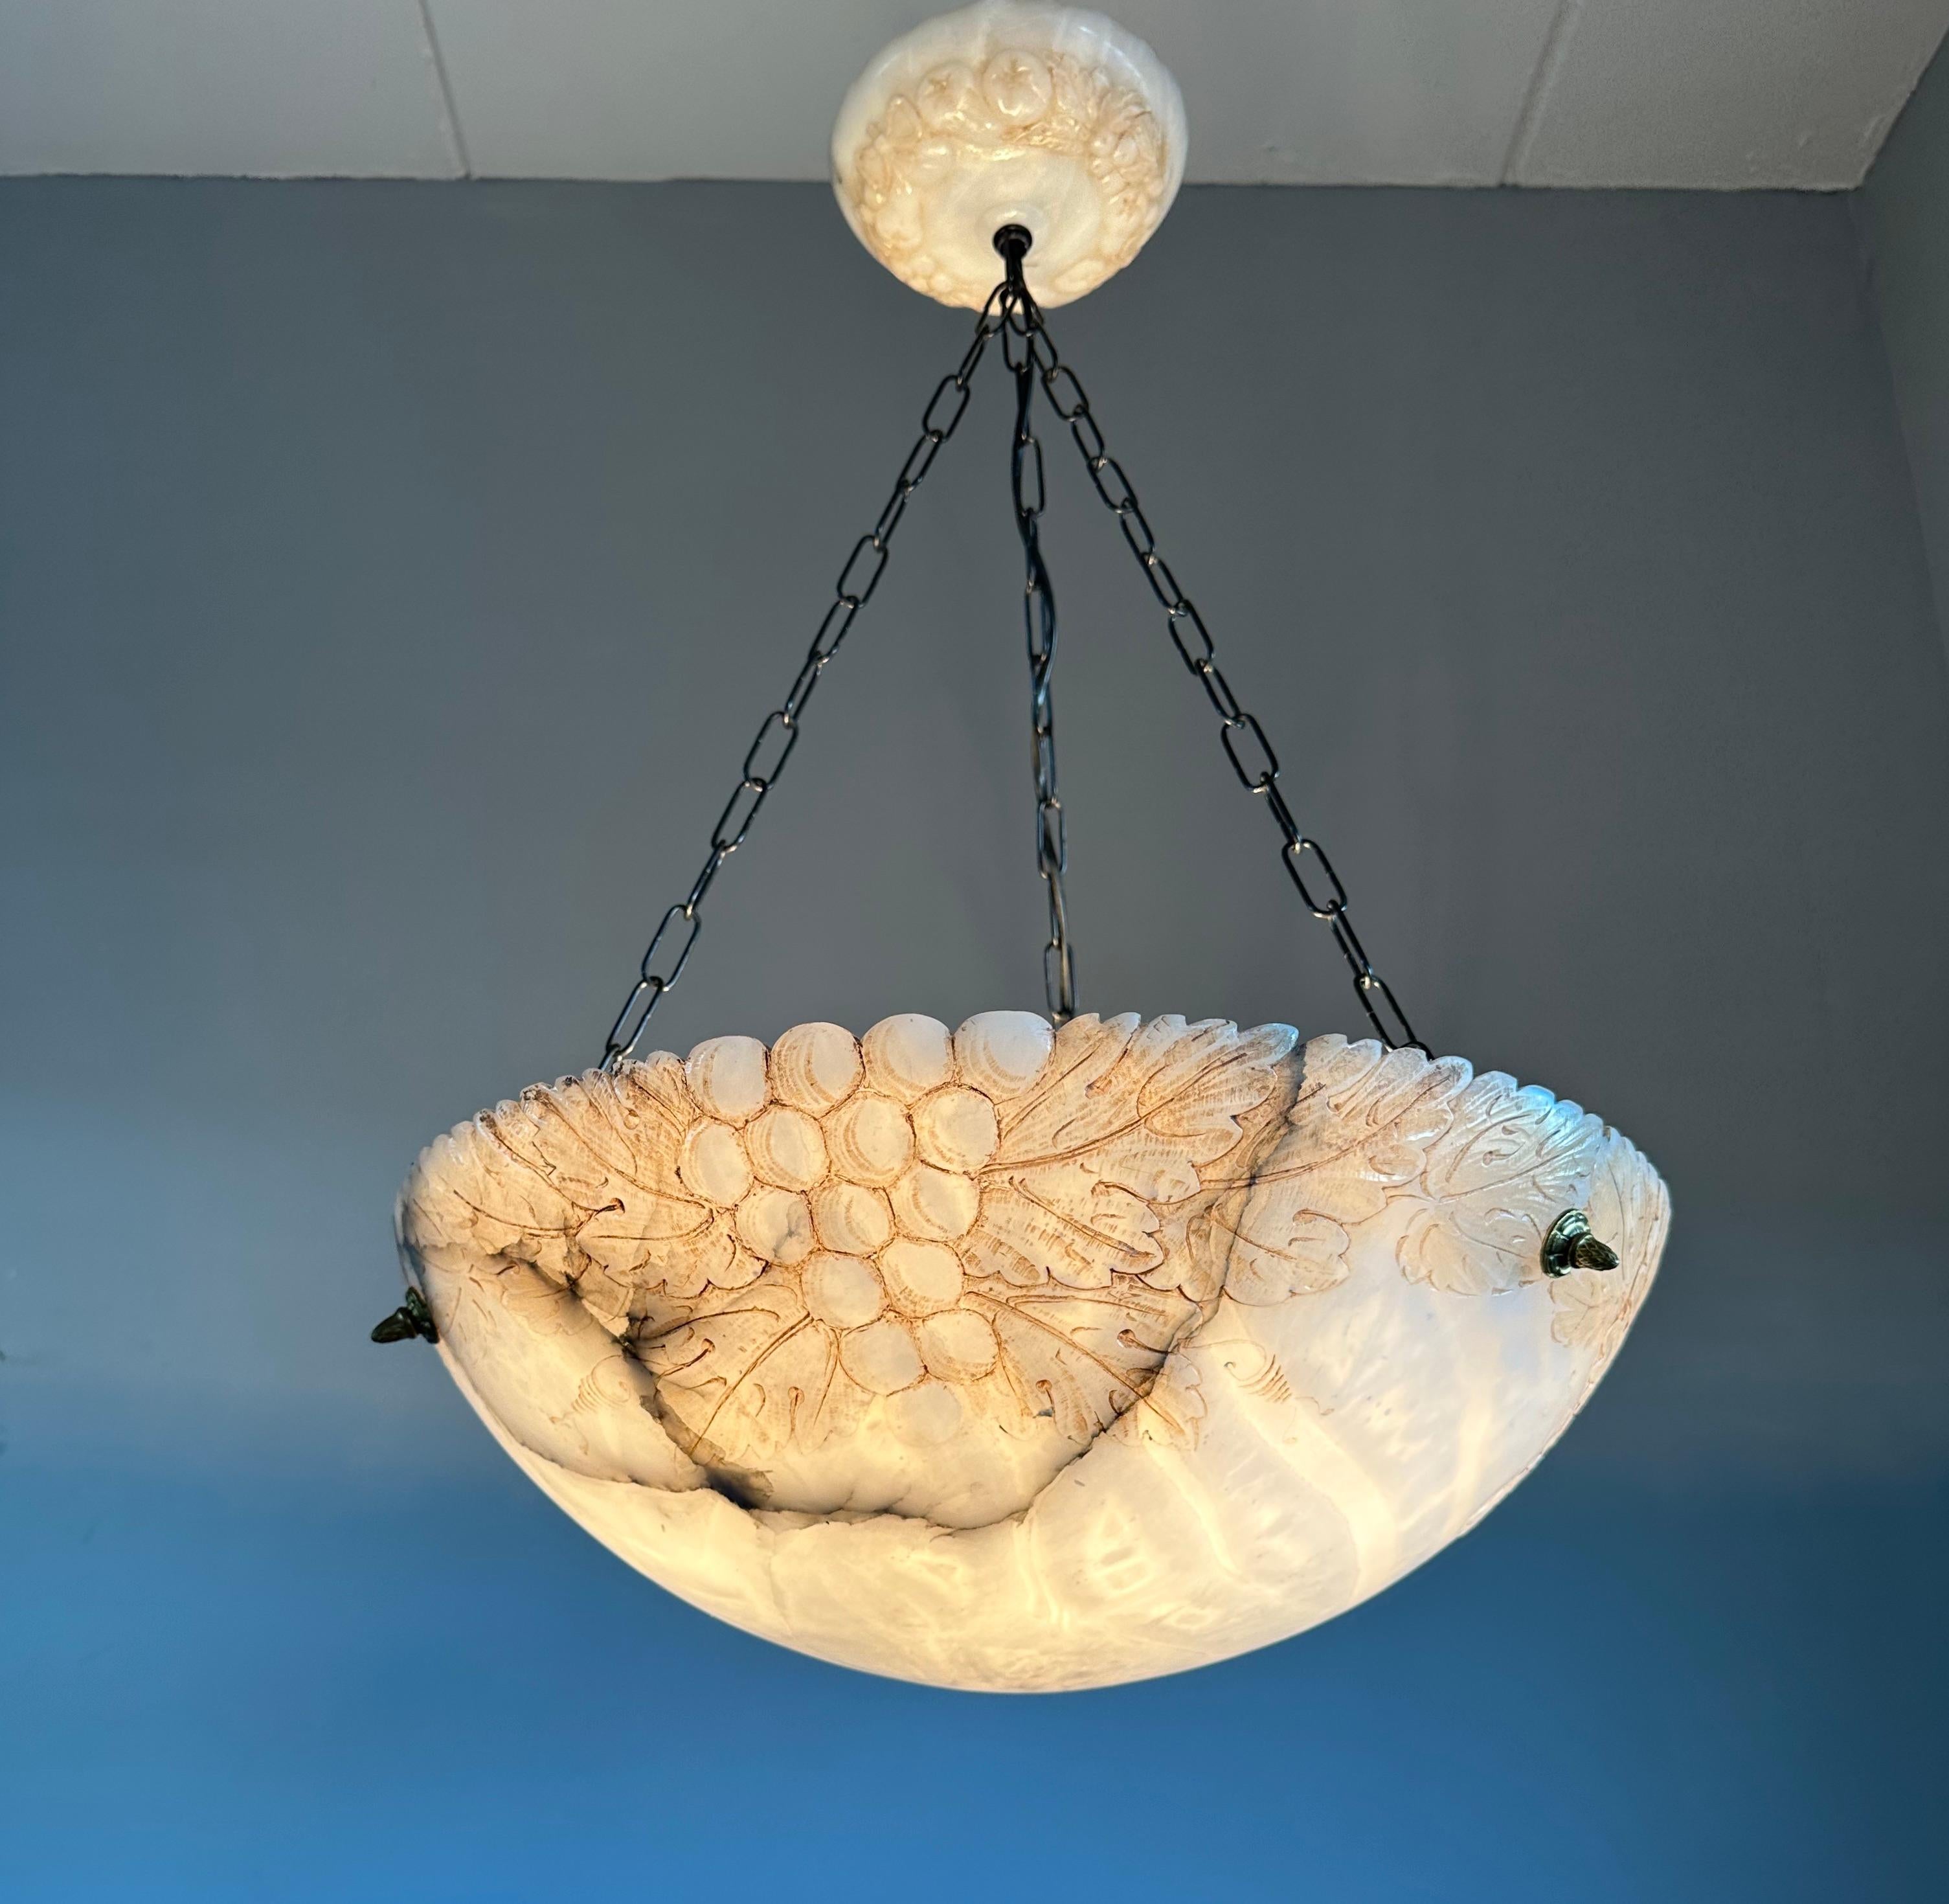 Great antique alabaster chandelier with a hand carved autumn pattern.

This unique Arts and Crafts pendant from the earliest years of the 1900s comes with a wonderful acorn bunch and oak tree leaf design around the upper rim. The pattern is